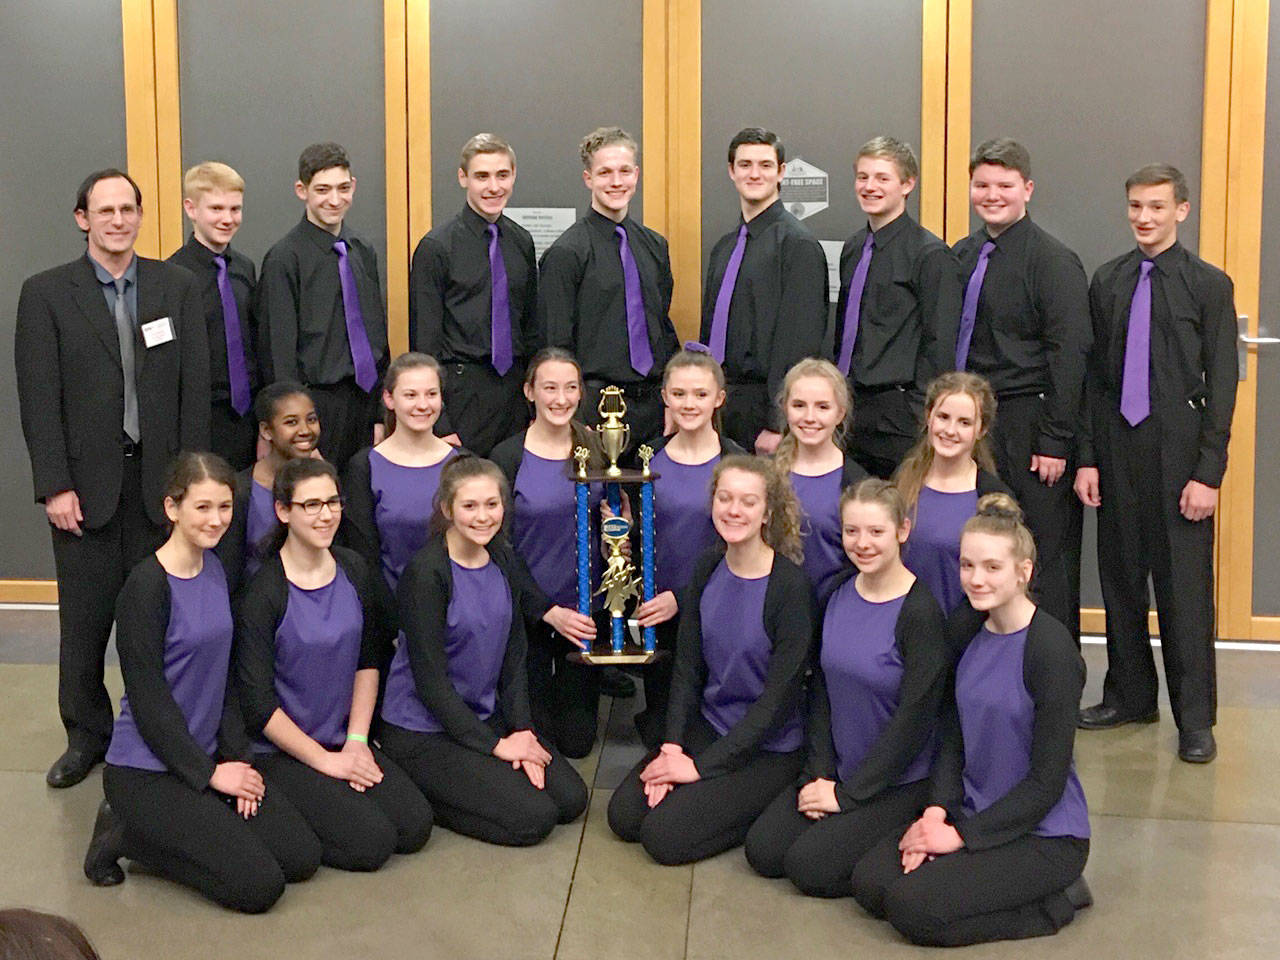 The Northwinds Homeschool Jazz 1 Band earned top honors at the Clark College Jazz Festival in January.